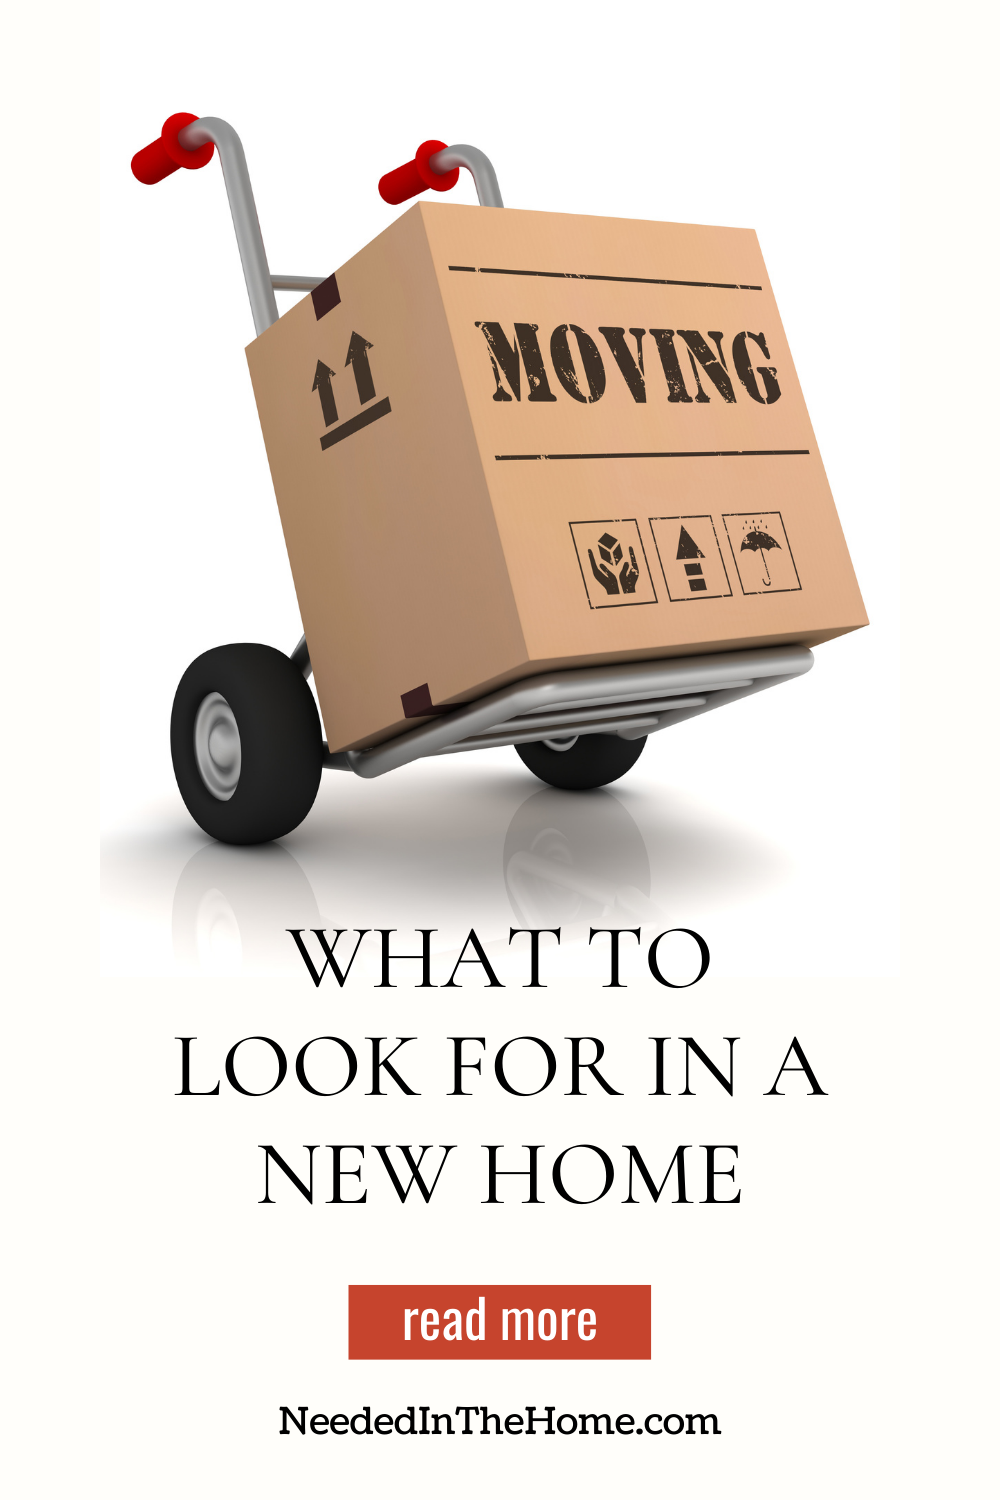 pinterest-pin-description what to look for in a new home cart dolly with box labeled moving read more button neededinthehome